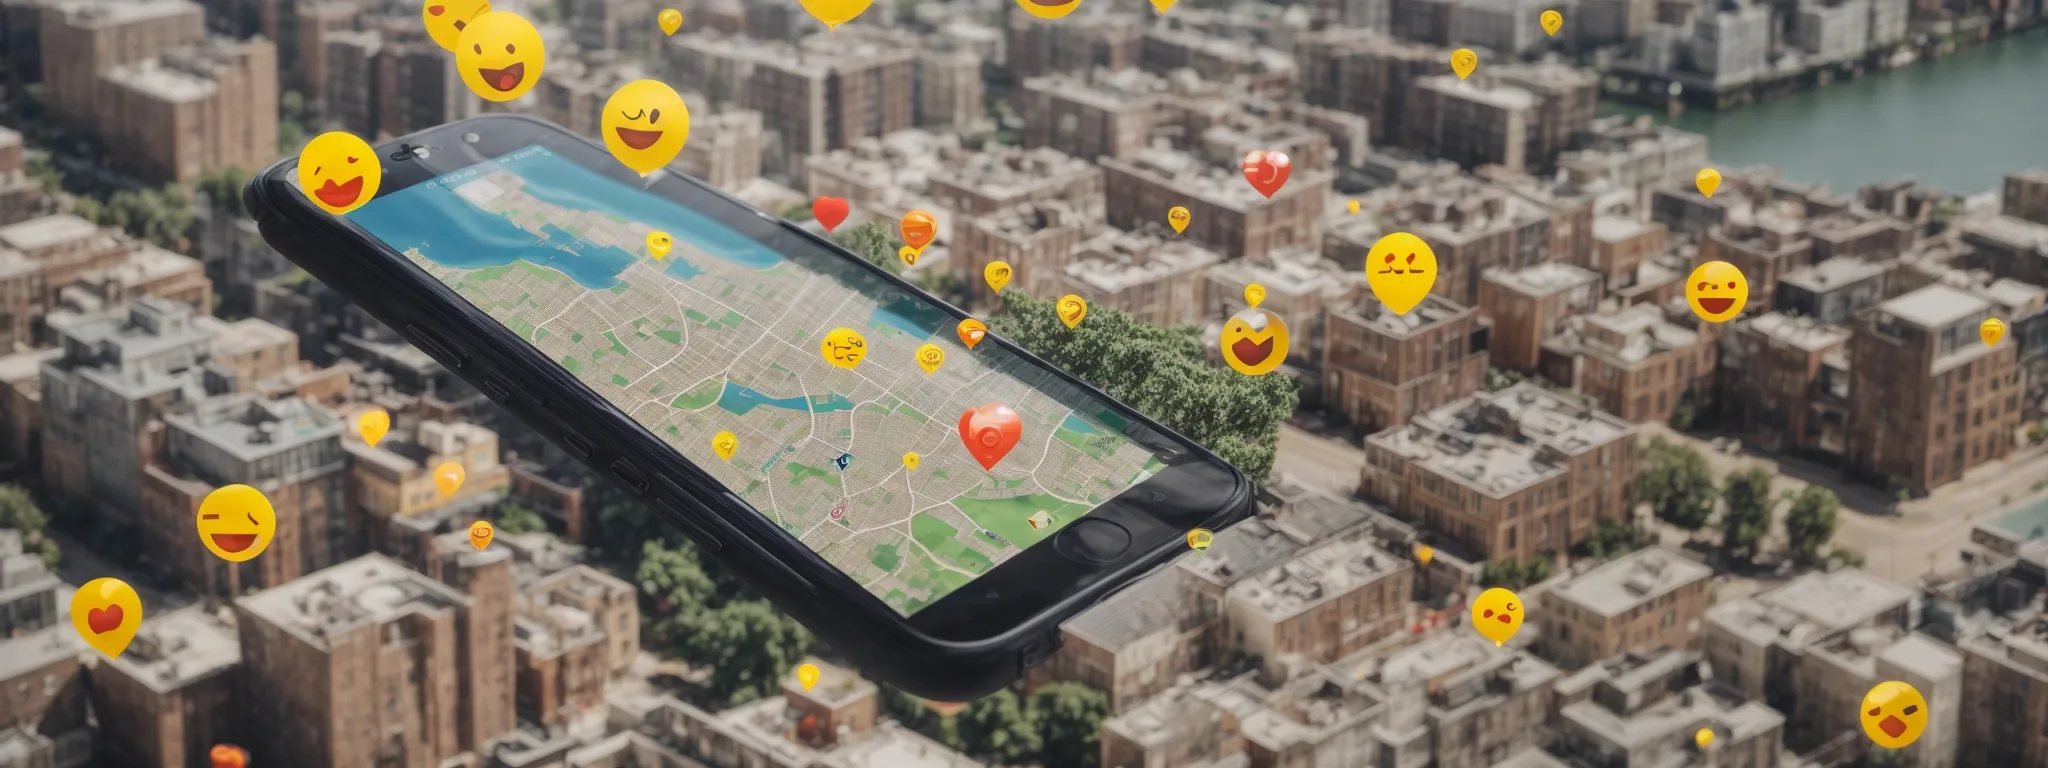 a smartphone displaying a map with various emoji icons pinpointing local businesses around a city.